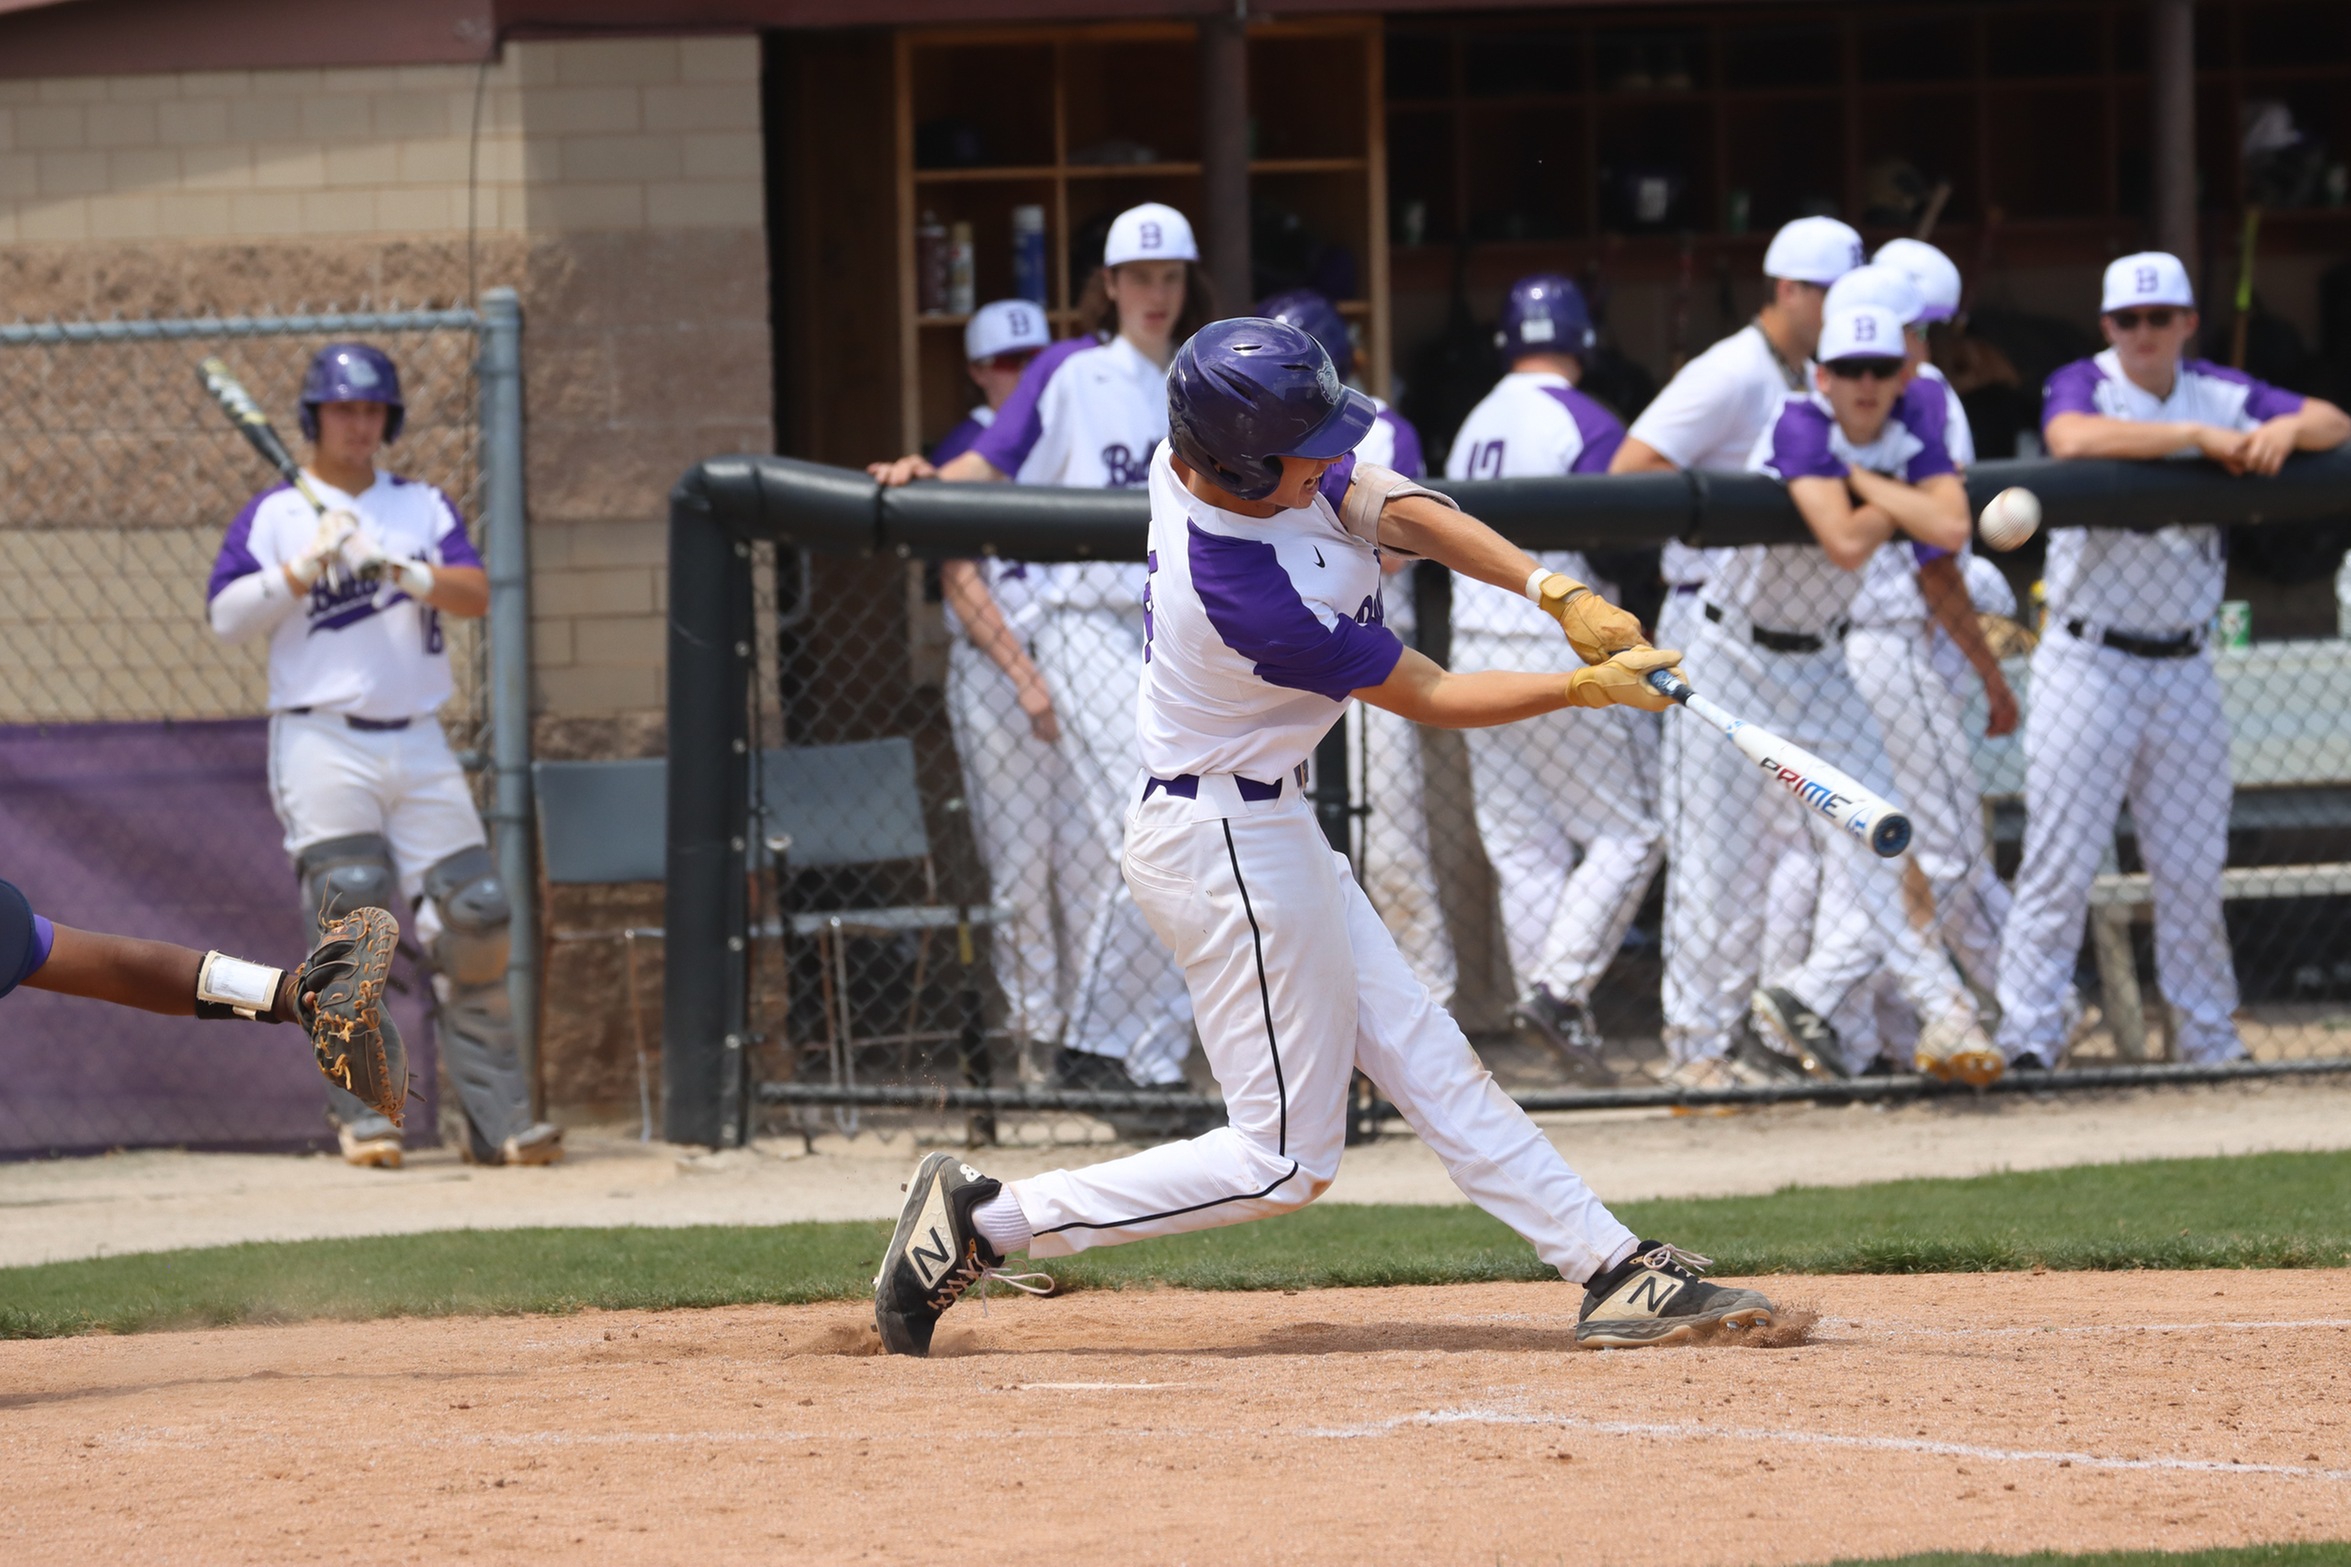 No. 21 Baseball wins Bison Invitational in Sectional tune-up